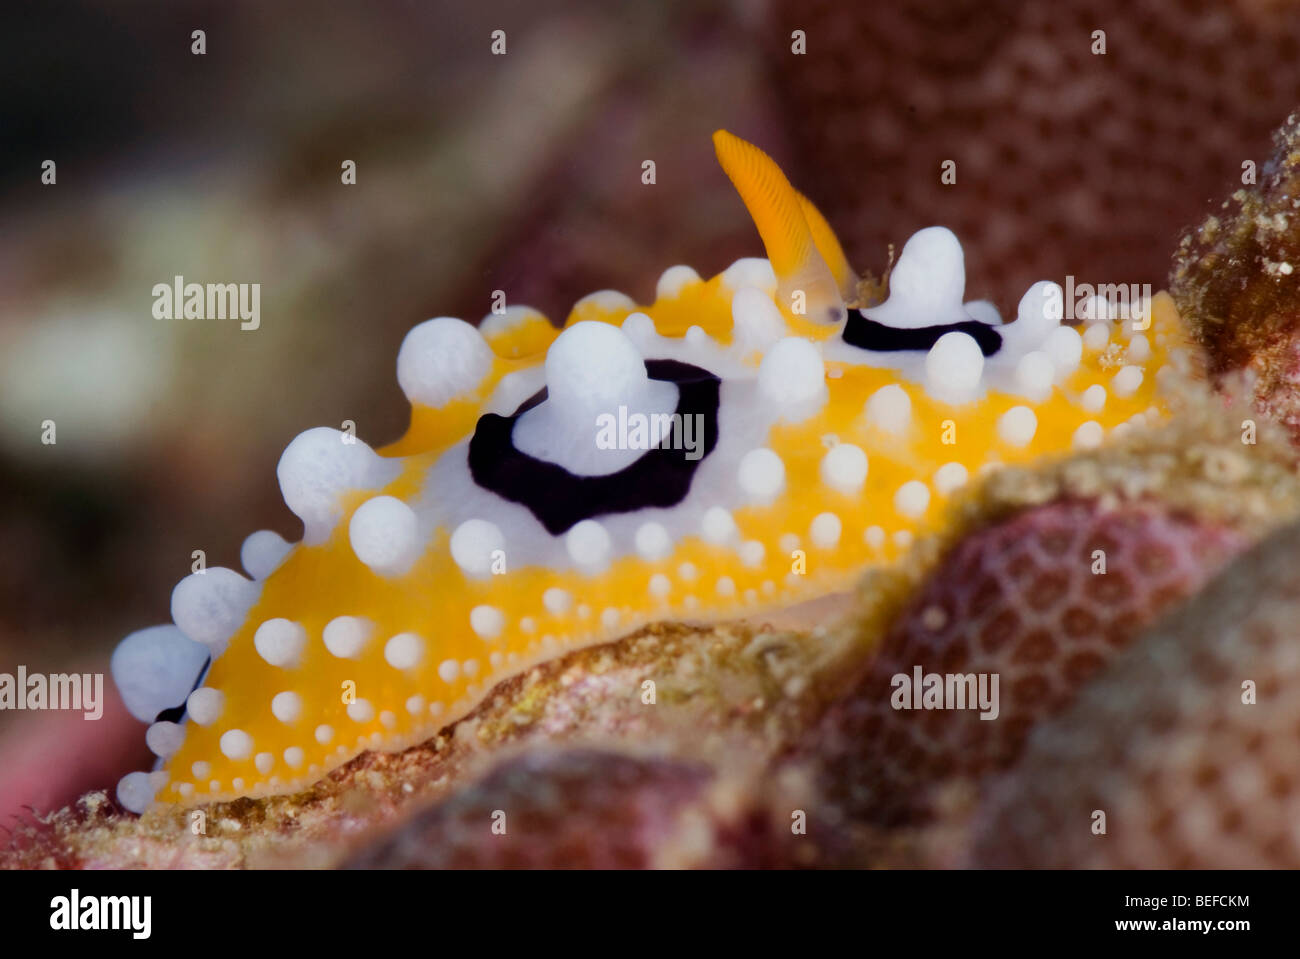 Yellow Nudibranch with white warts some of which are surrounded by a black circle under water. Stock Photo